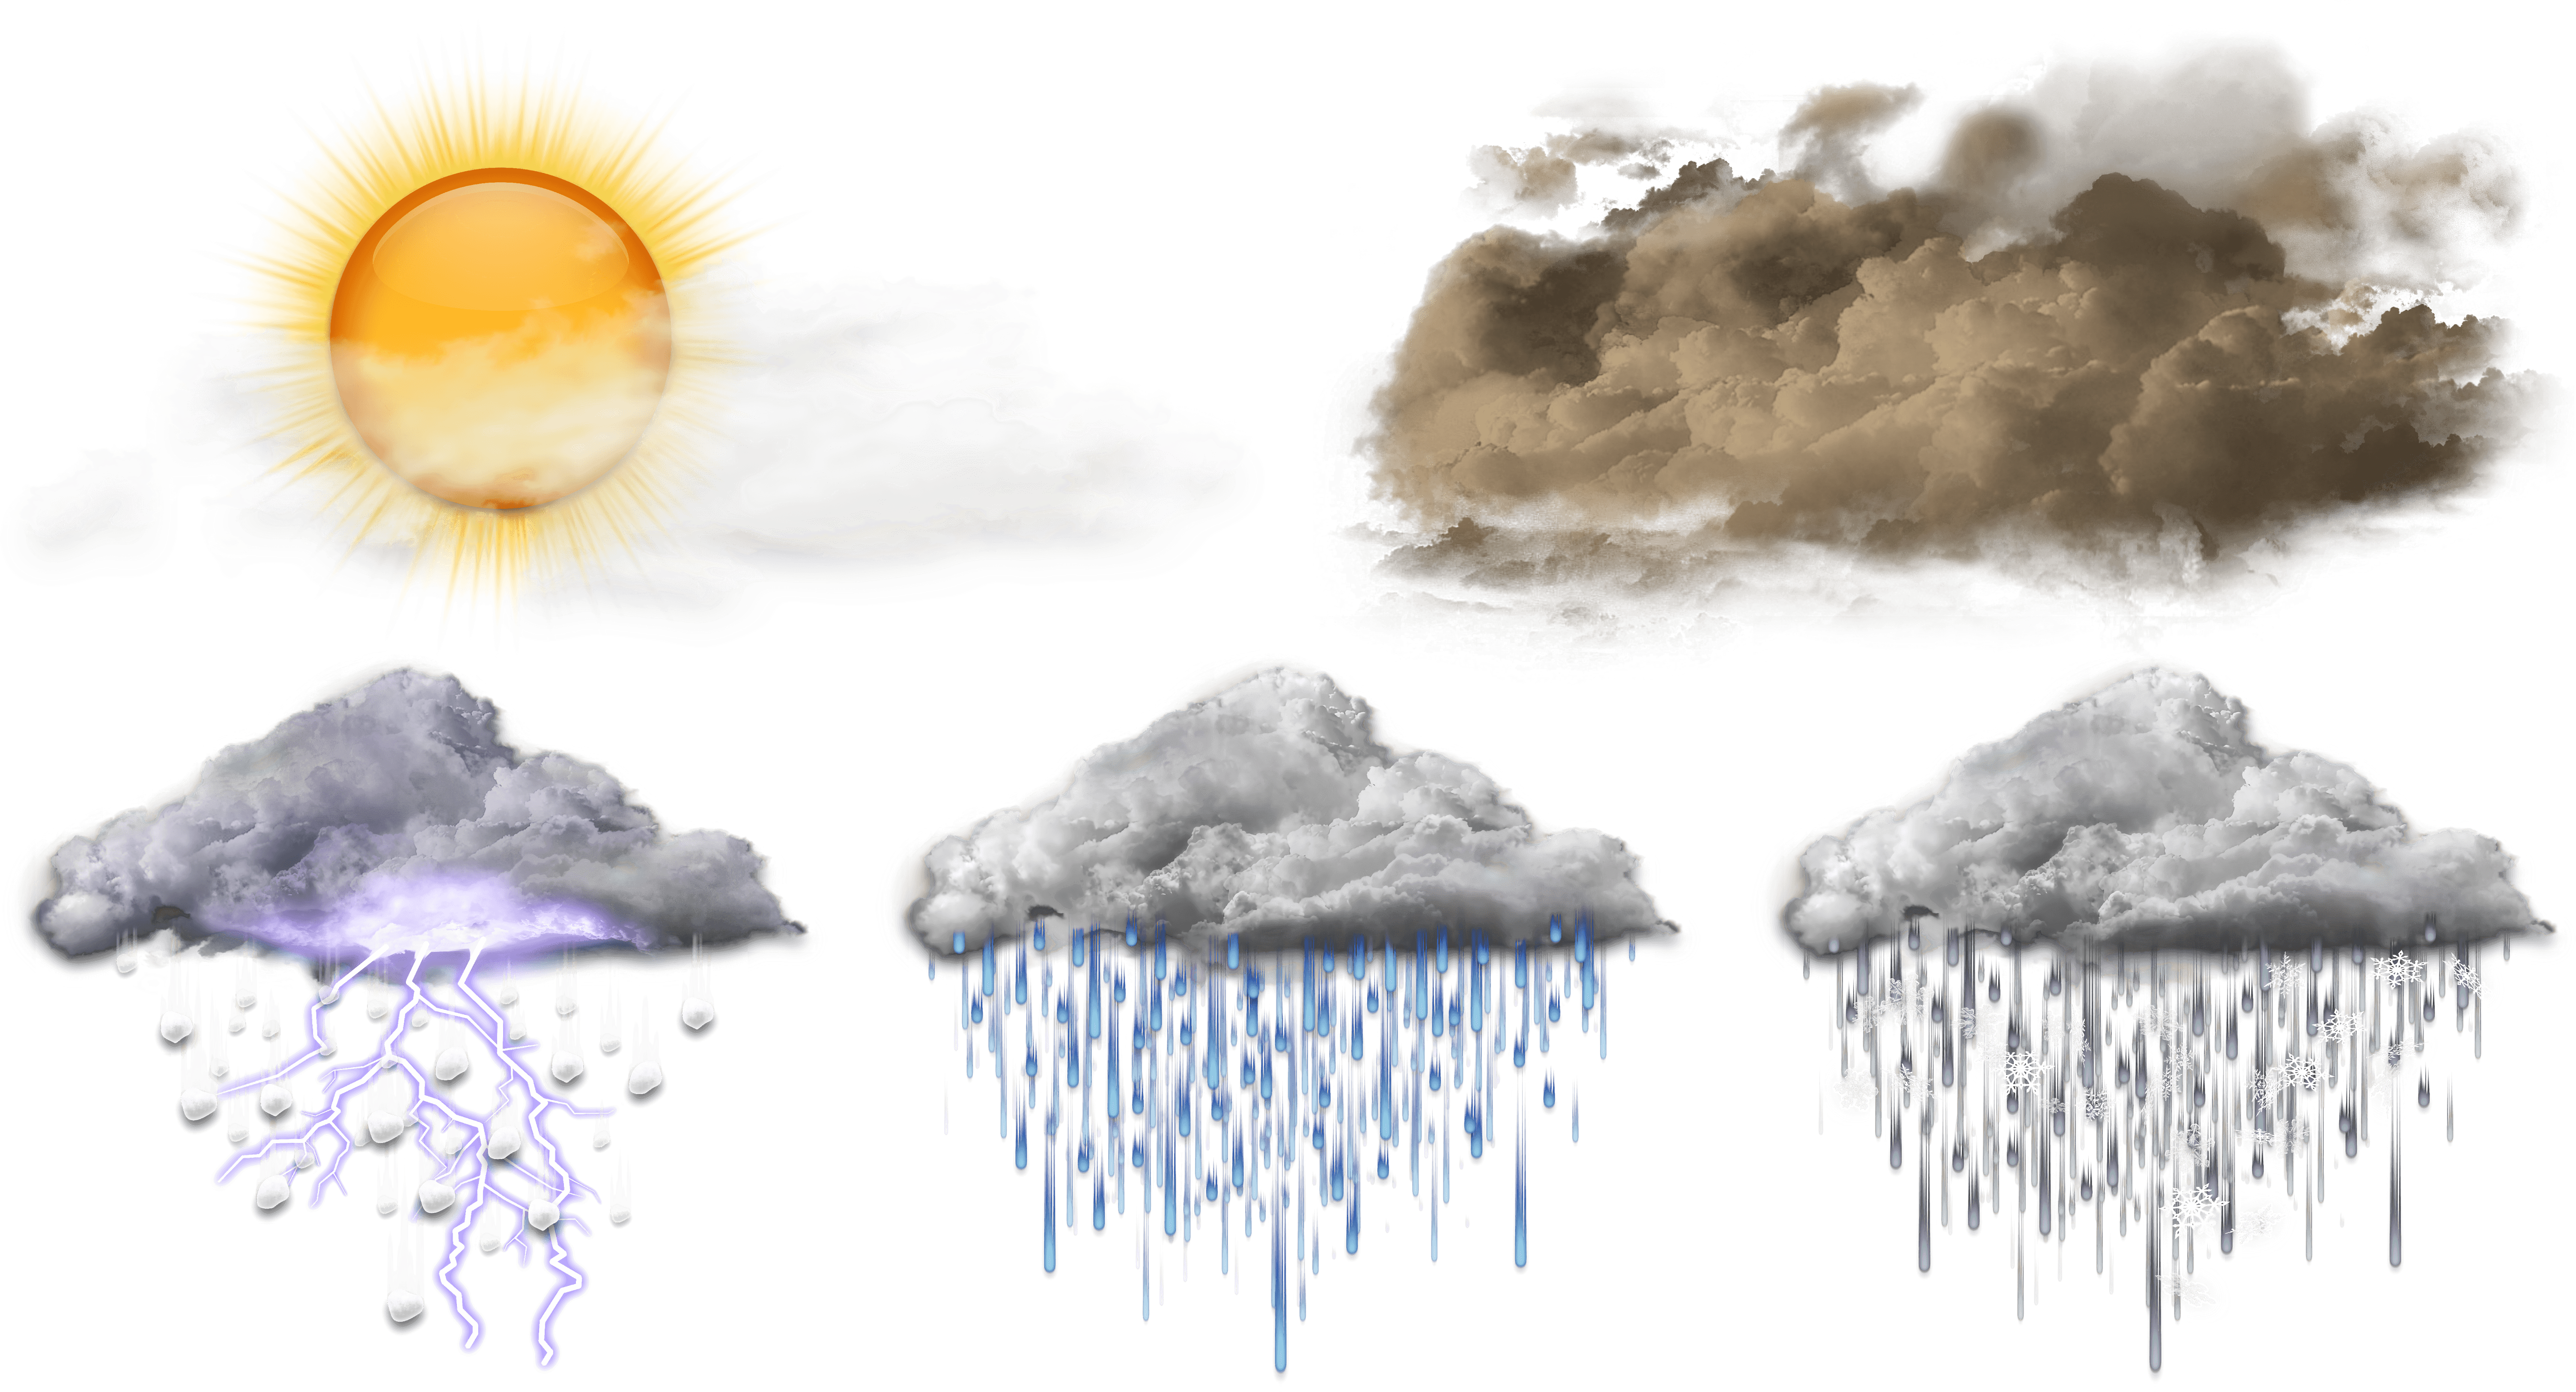 High-resolution, intricately detailed depictions of the previous set of weather icons.